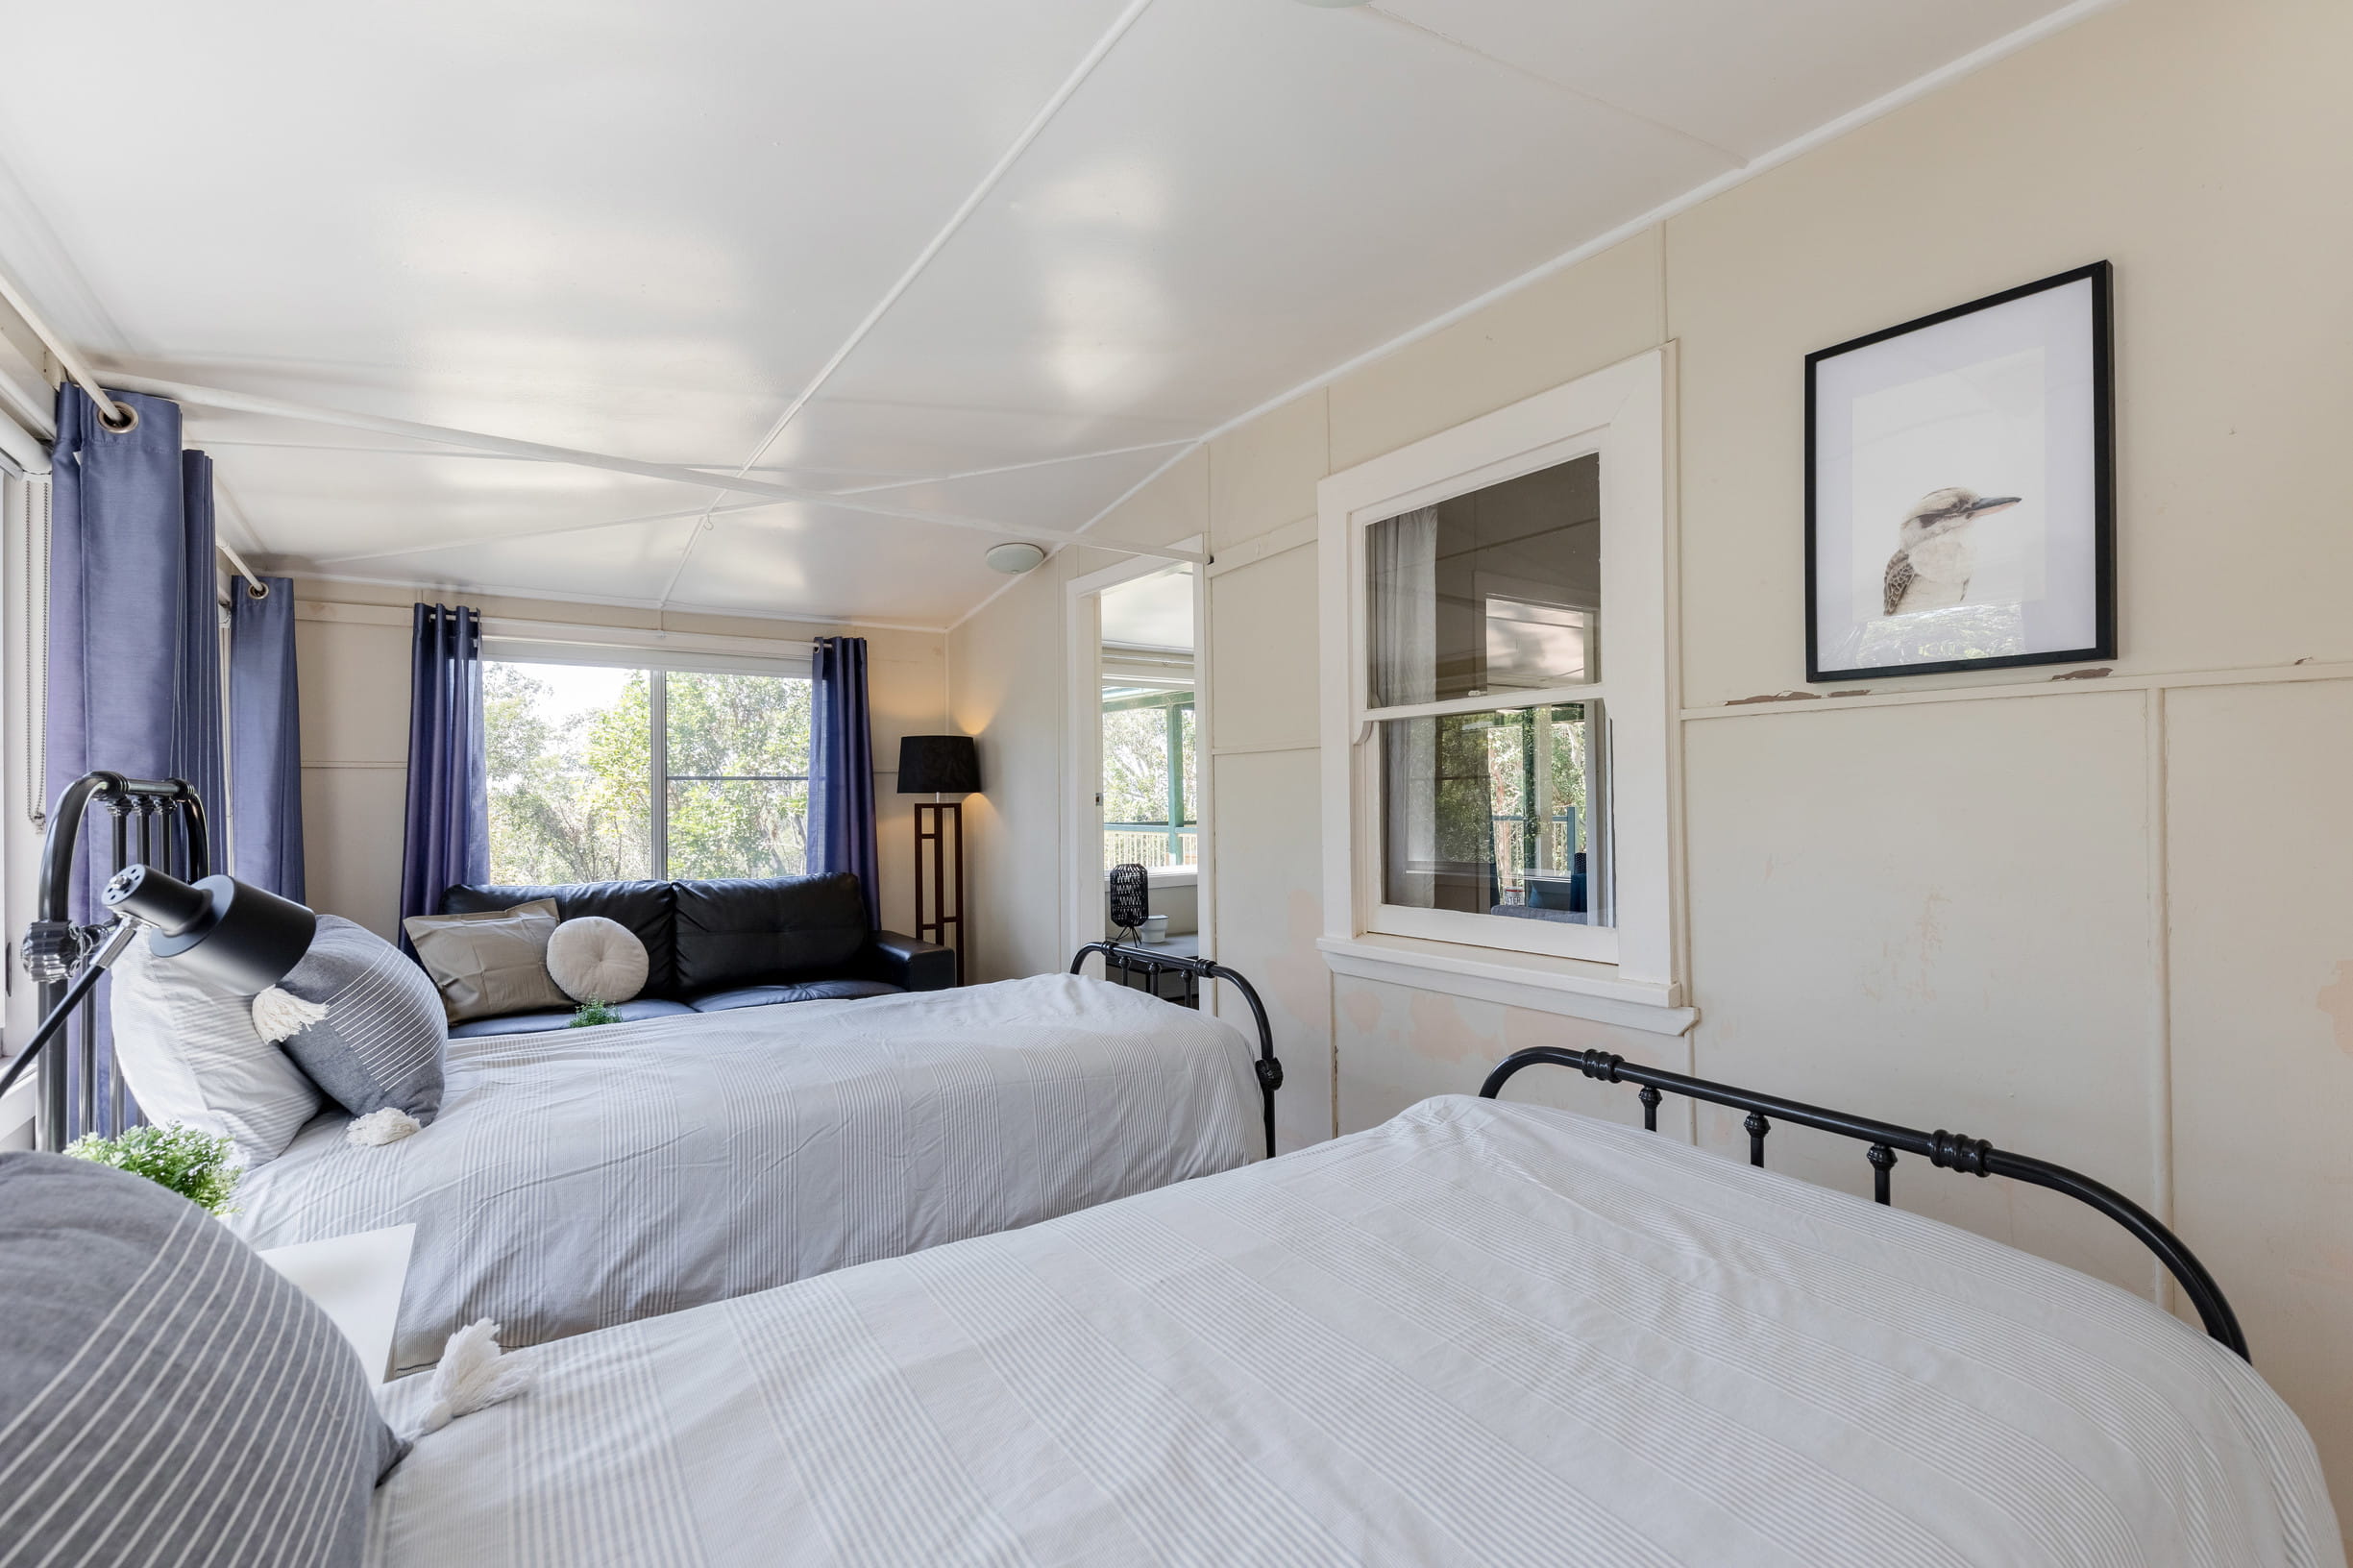 The second bedroom with single beds in Tuckers Rocks Cottage, Bongil Bongil National Park. Photo: Mitchell Franzi/DPIE